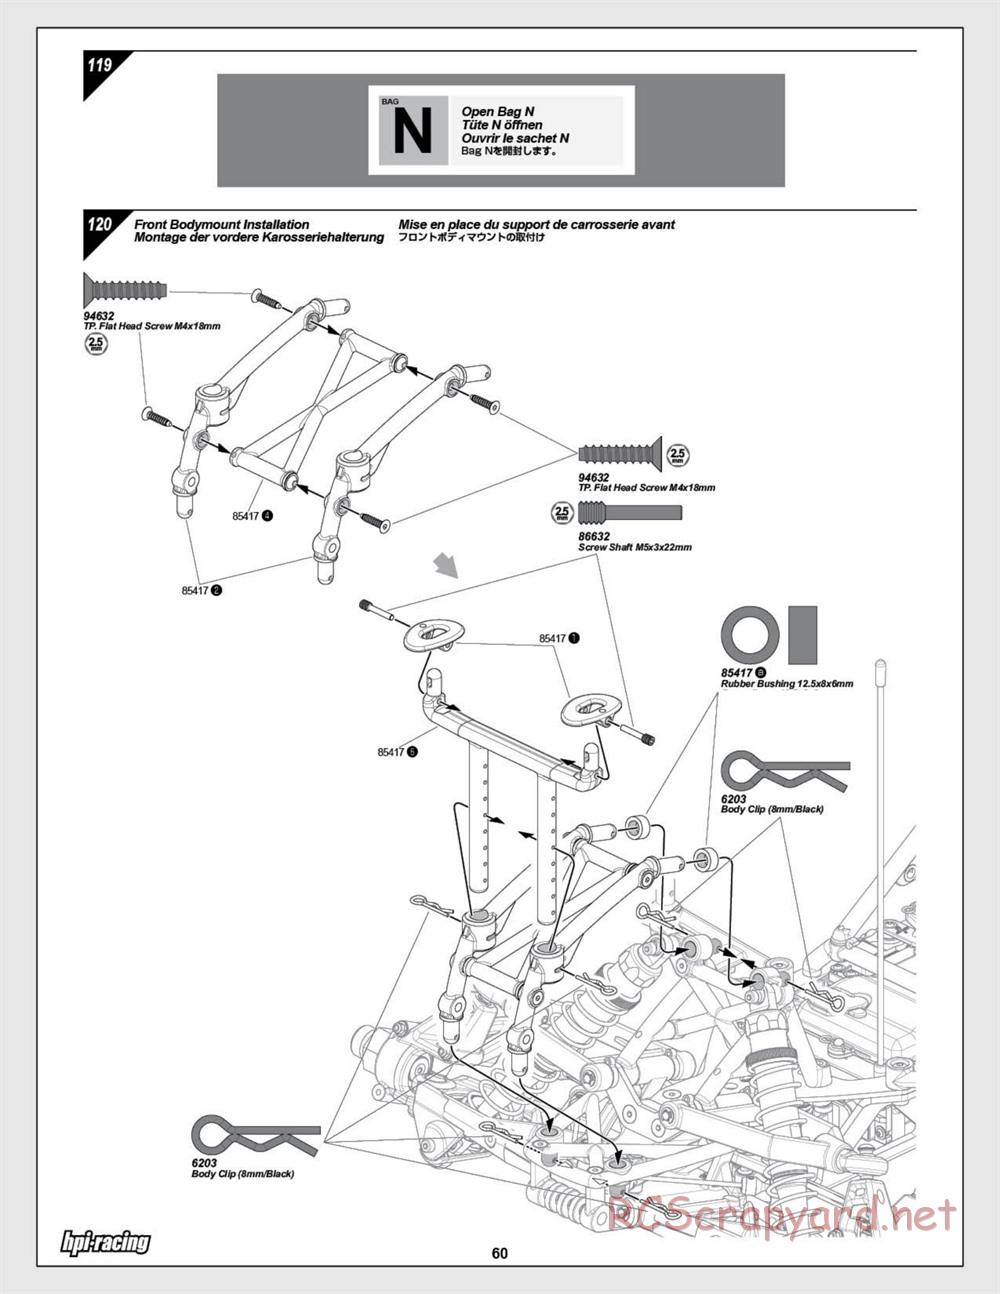 HPI - Baja 5SC SS - Exploded View - Page 60